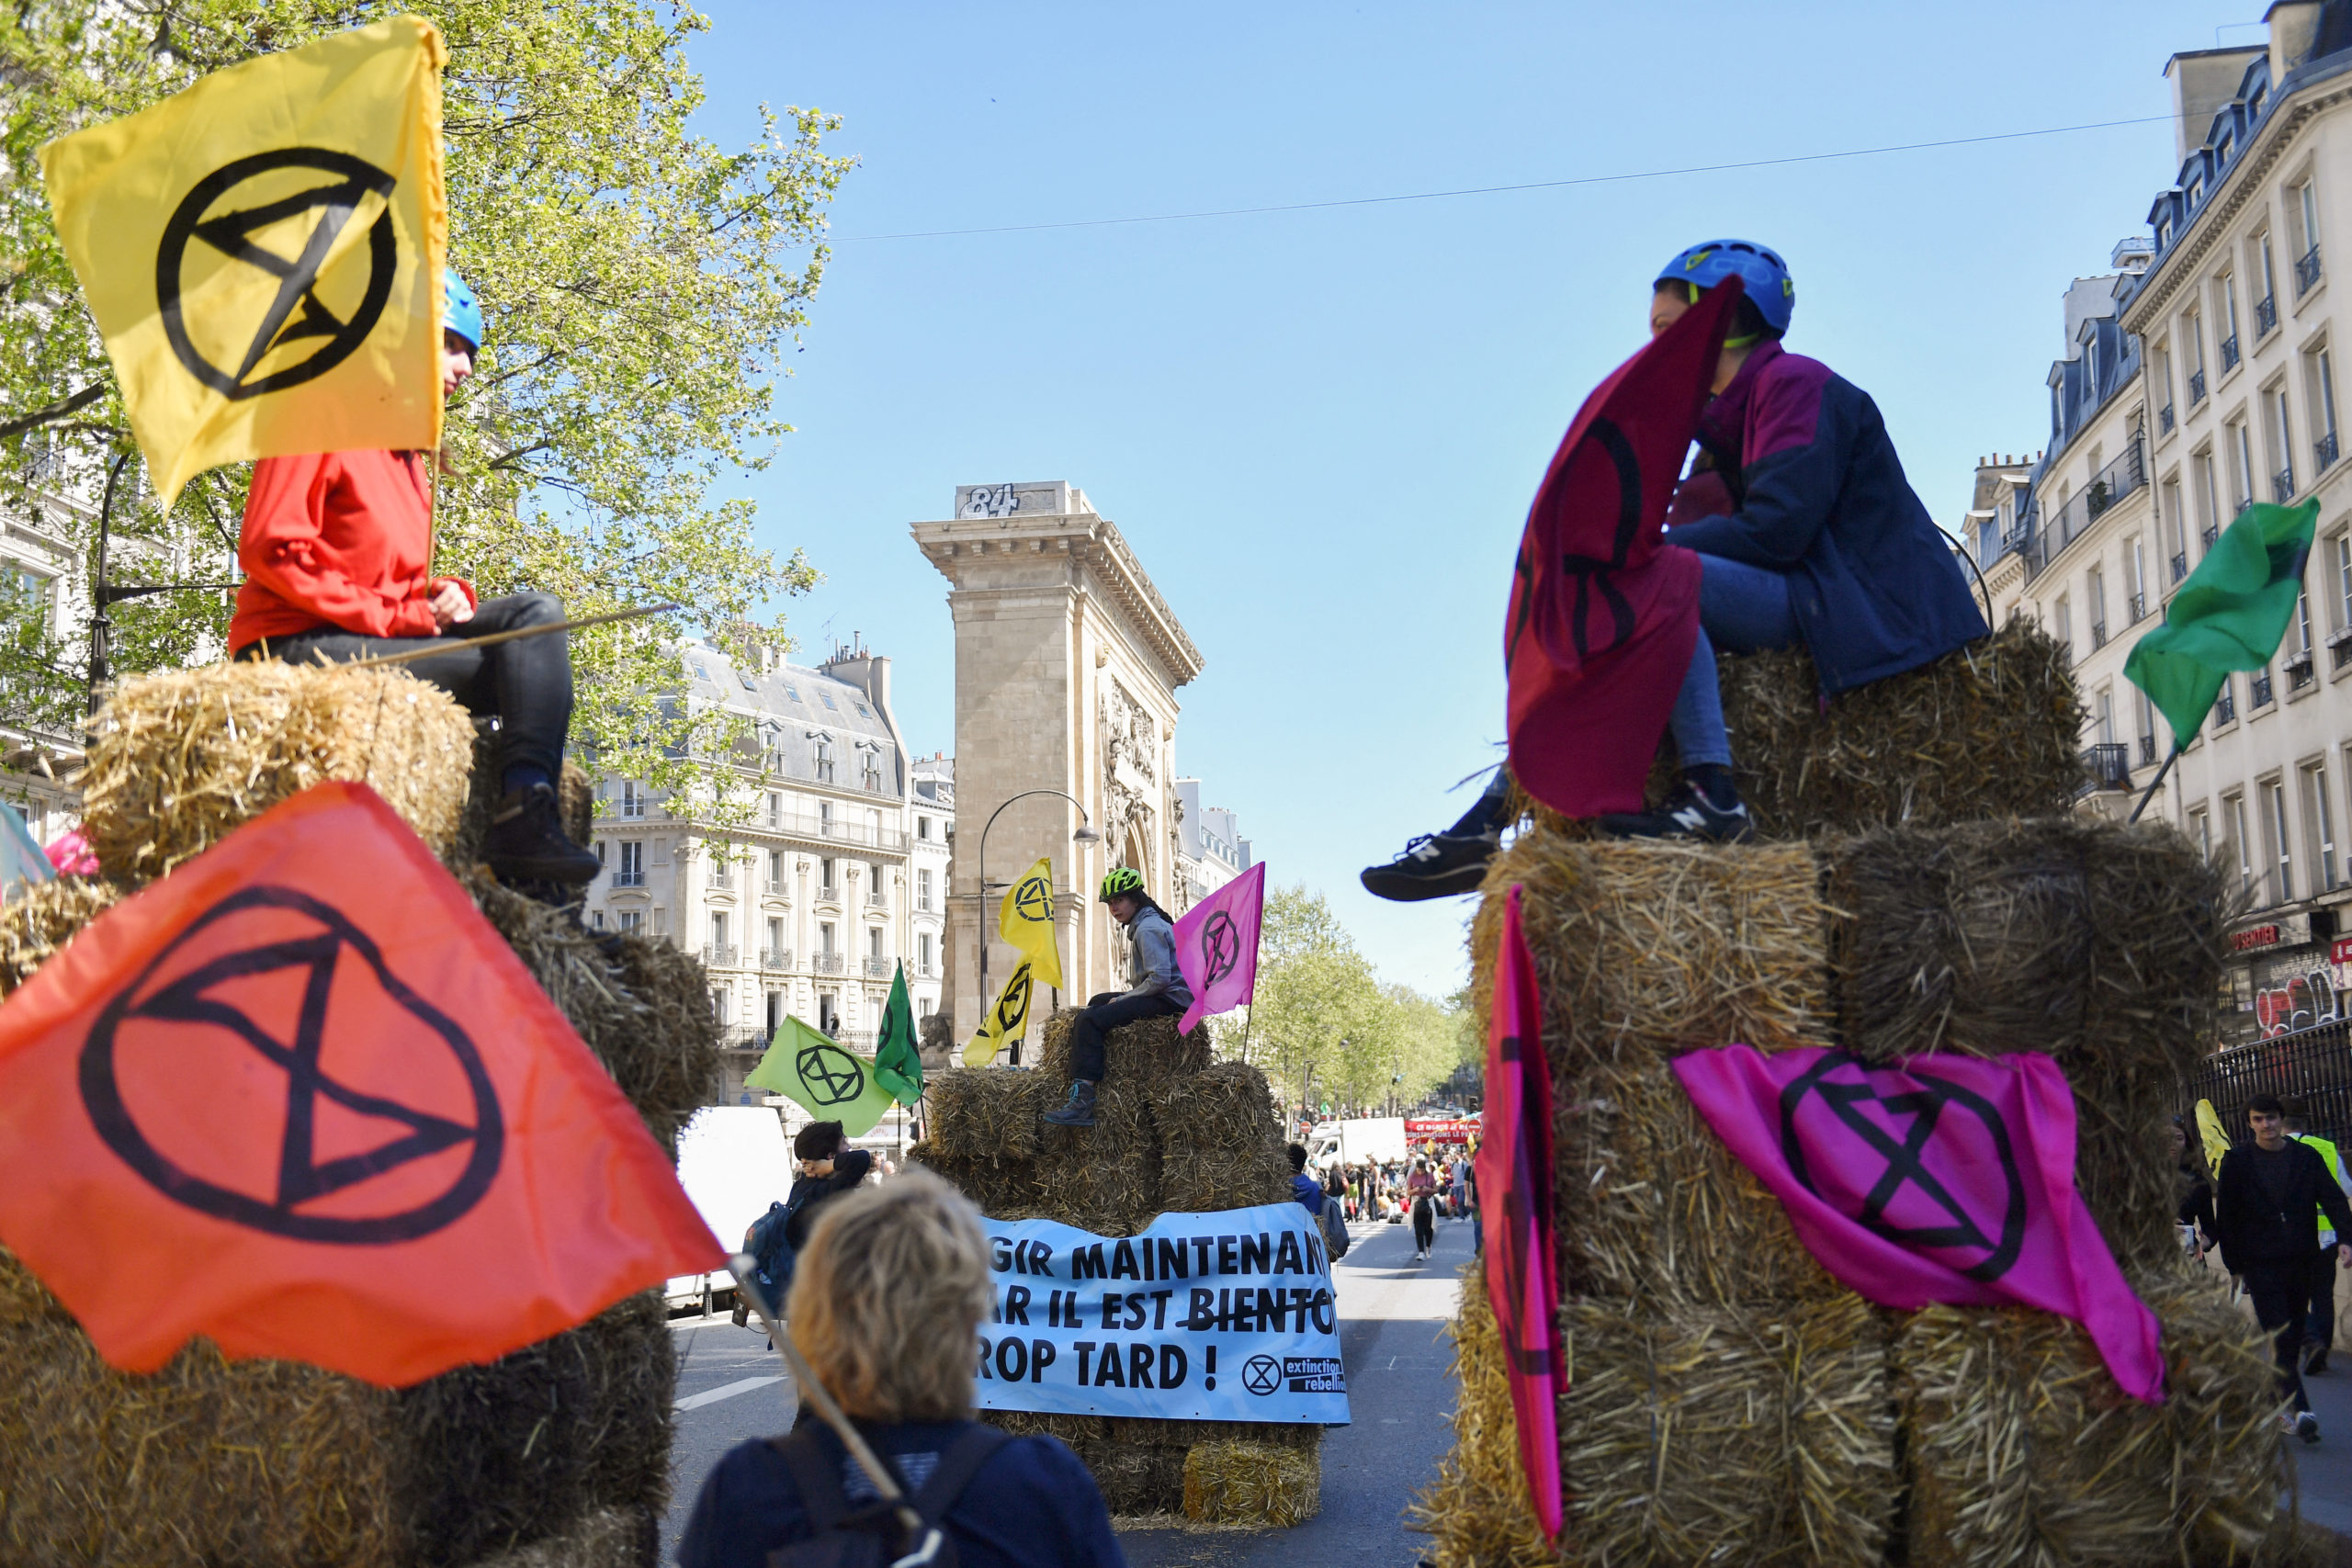 Extinction Rebellion activists hold placards with the logo at a protest in Paris